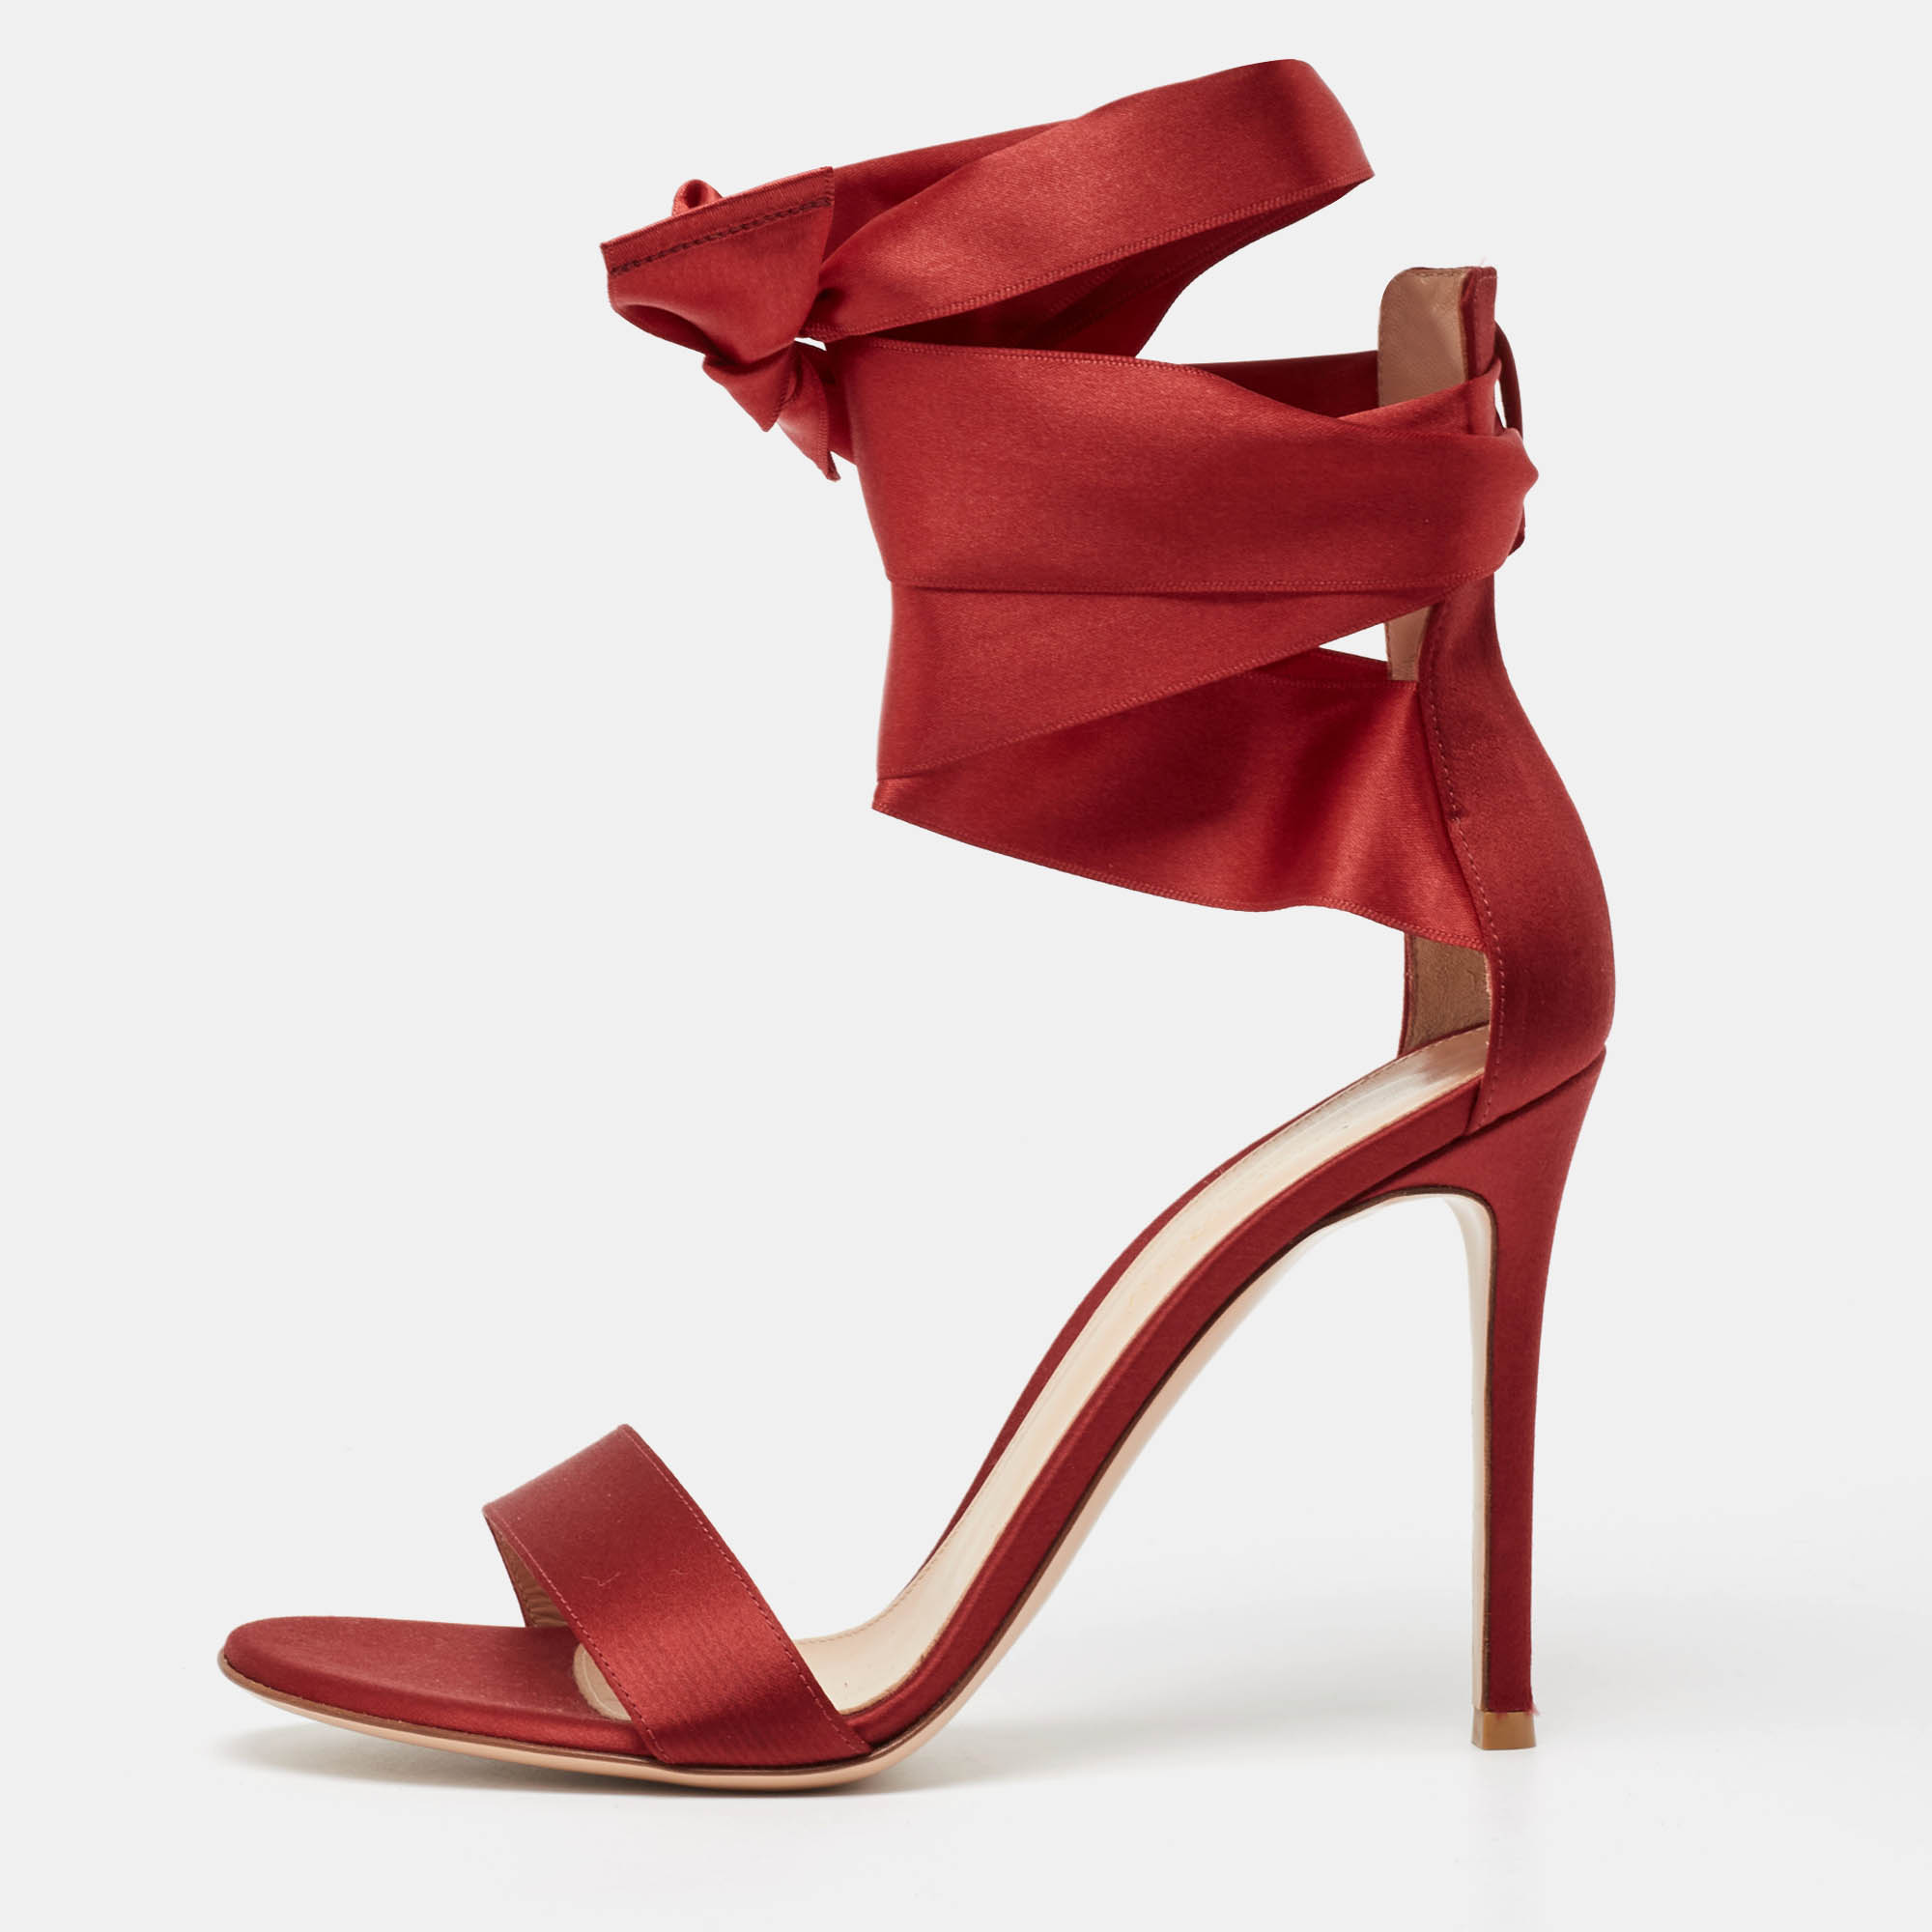 Gianvito rossi red satin gala ankle wrap sandals size 38.5